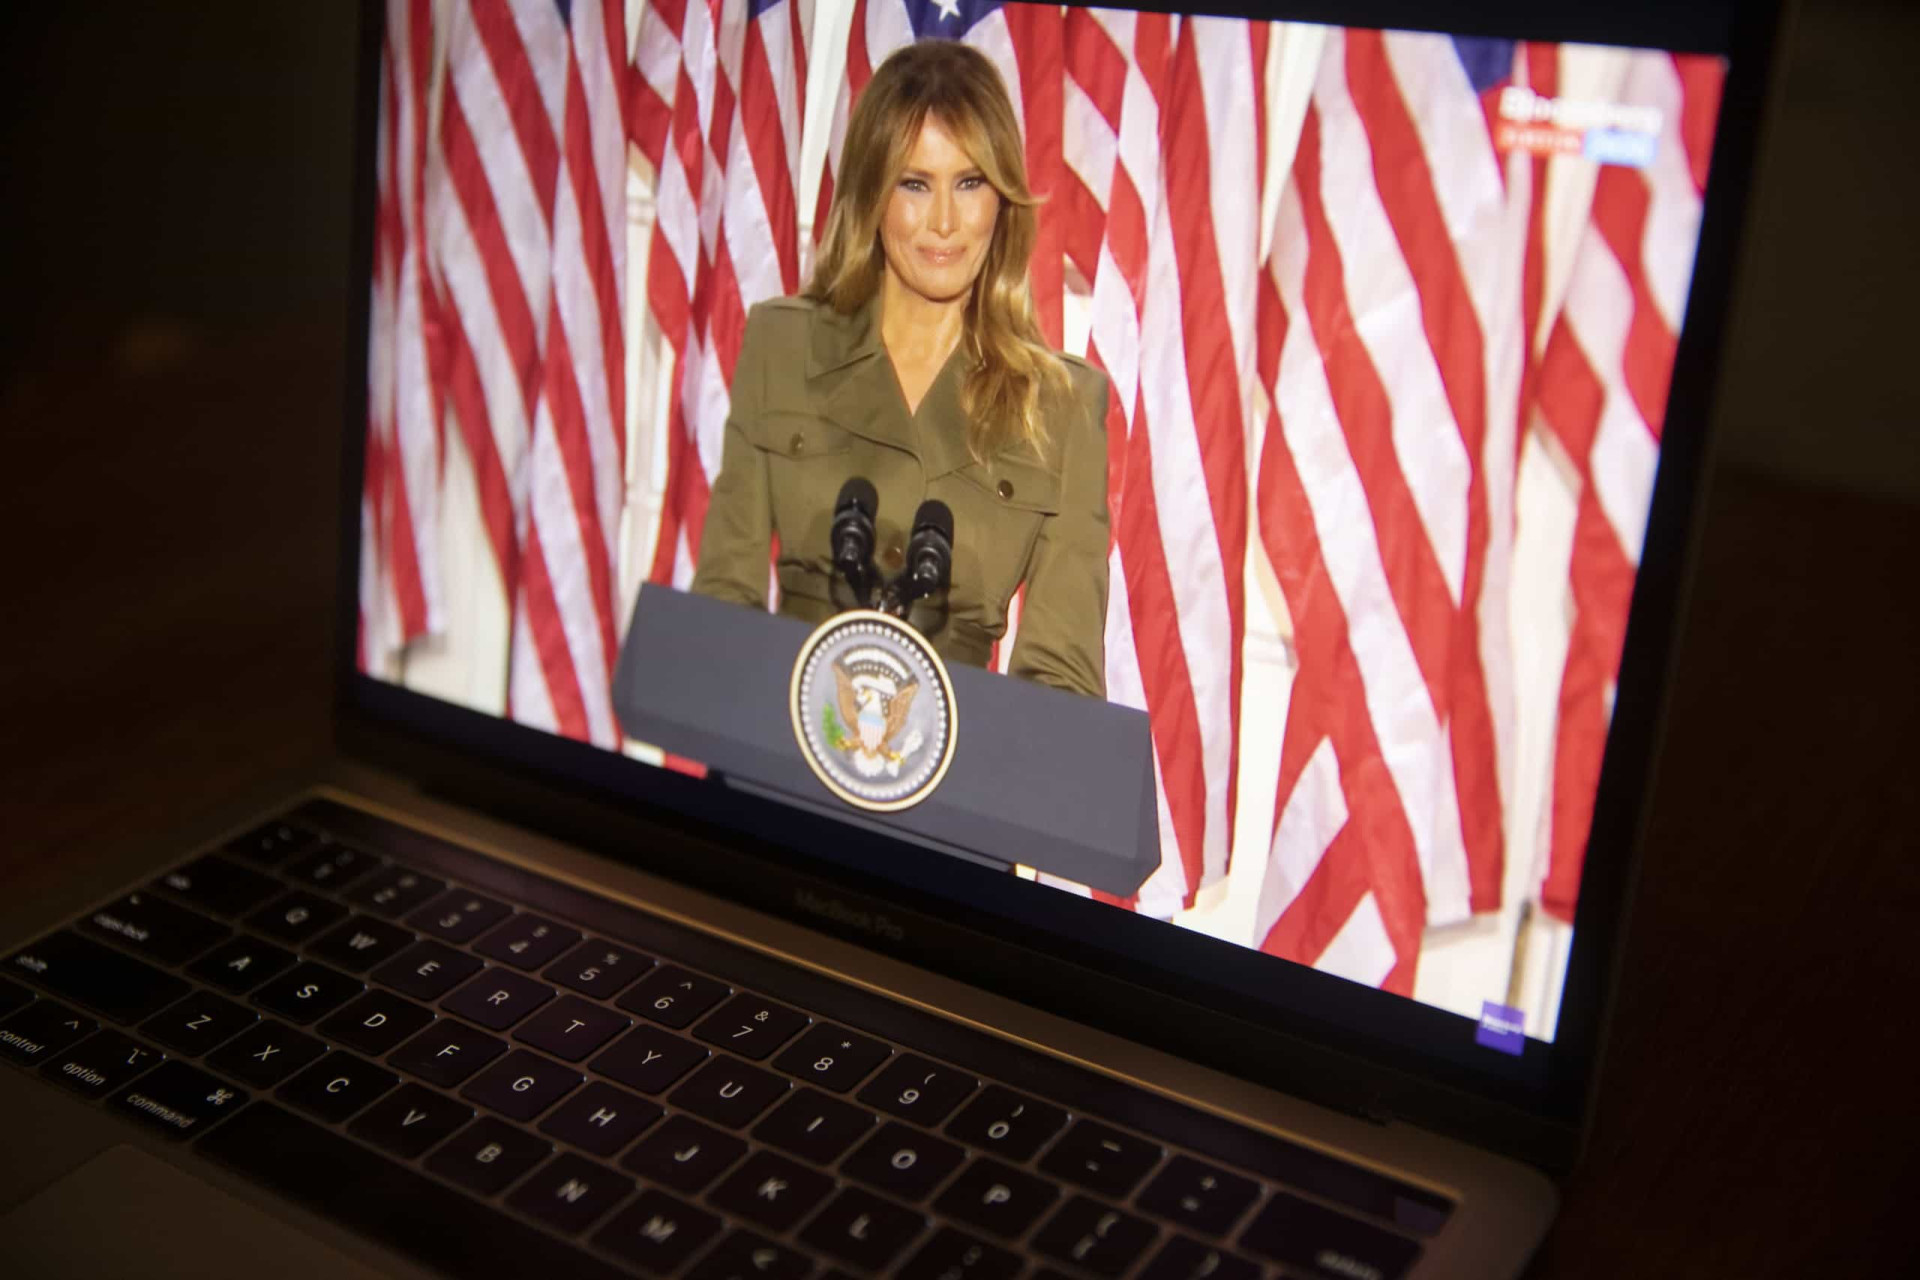 <p>Reportedly Melania Trump broke this rule and used a personal email account to discuss government business.</p><p><a href="https://www.msn.com/en-us/community/channel/vid-7xx8mnucu55yw63we9va2gwr7uihbxwc68fxqp25x6tg4ftibpra?cvid=94631541bc0f4f89bfd59158d696ad7e">Follow us and access great exclusive content every day</a></p>